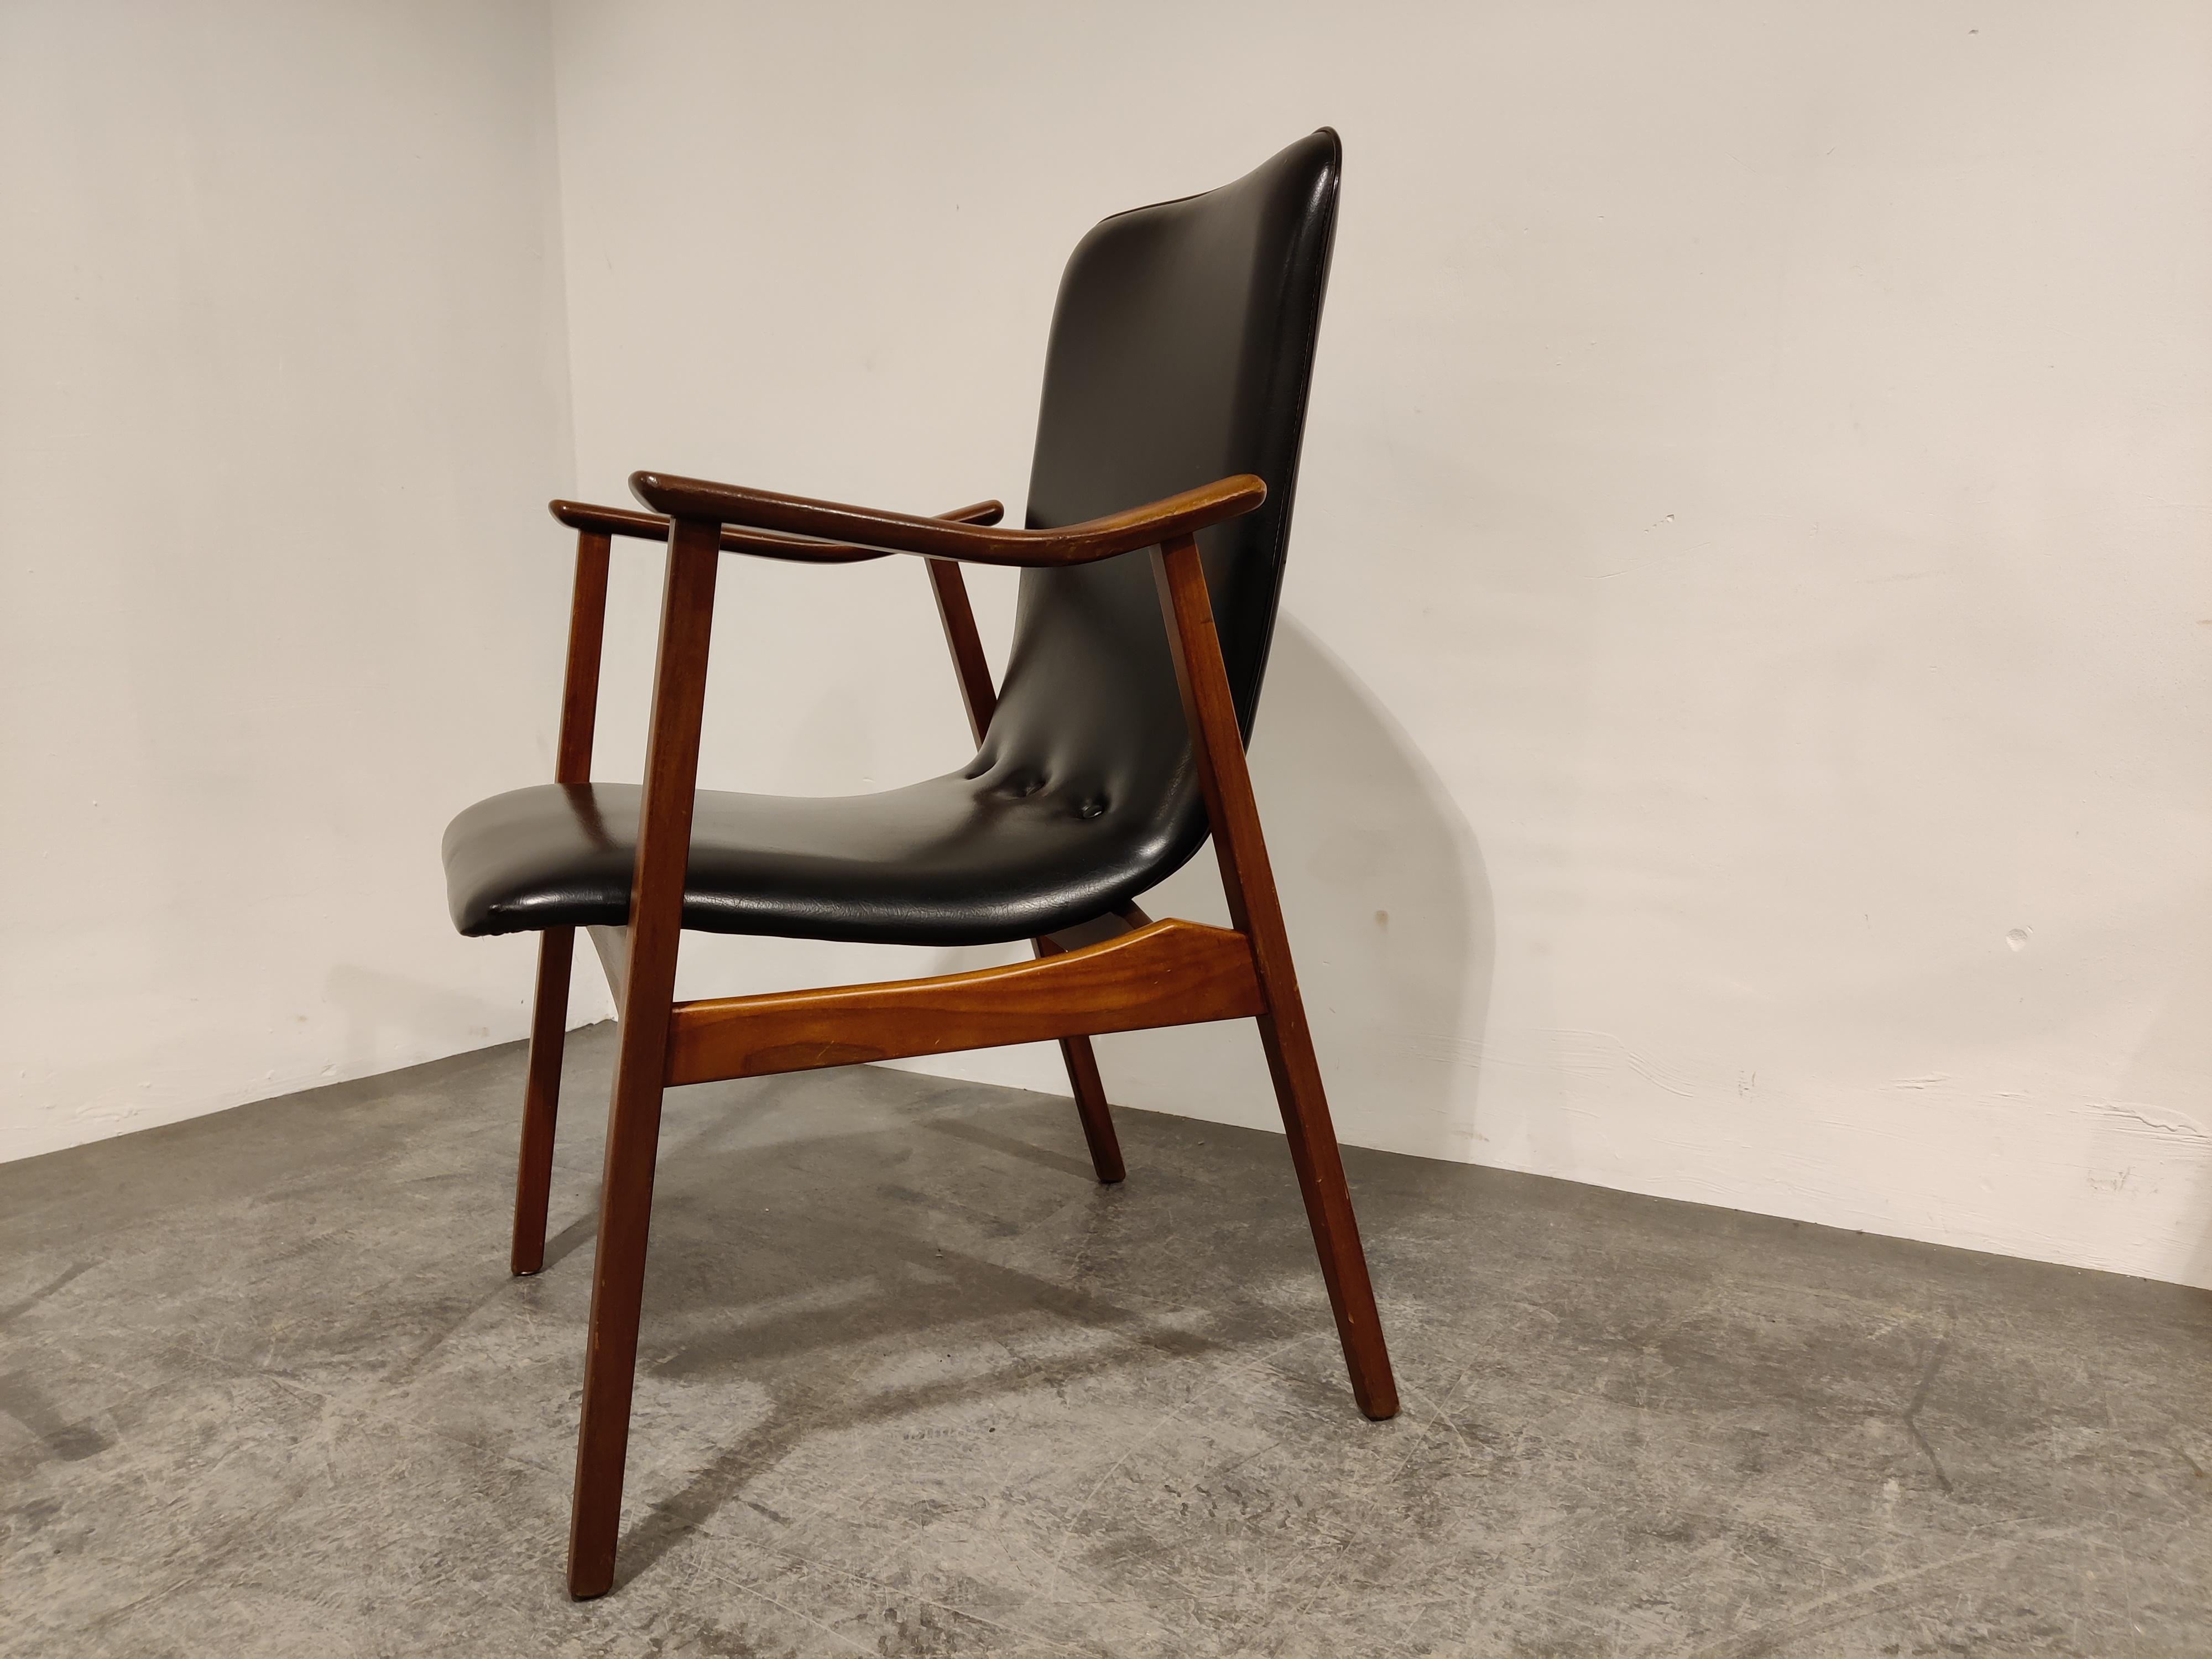 Armchair designed by Louis Van Teeffelen for Wébé in the 1960s.

Beautiful organic shapes.

Original skai upholstery.

Perfect condition.

1960s - The Netherlands

Dimensions:
Height: 95cm/37.40